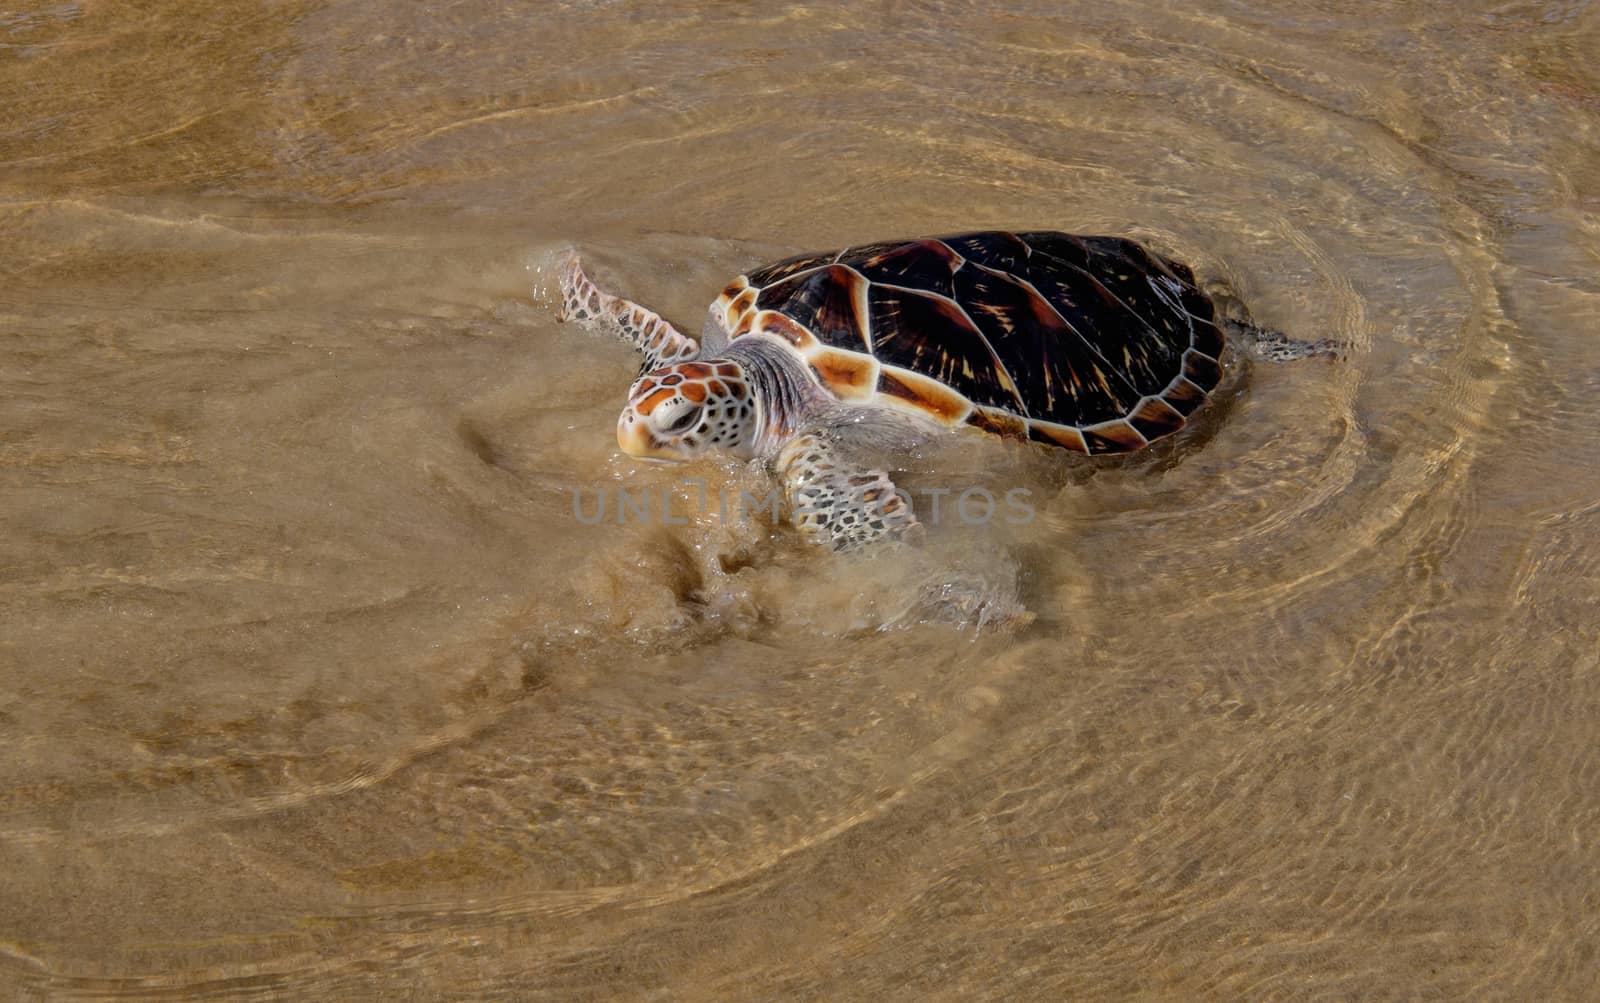 Tortoise is going into the sea on the sand beach by rainfallsup